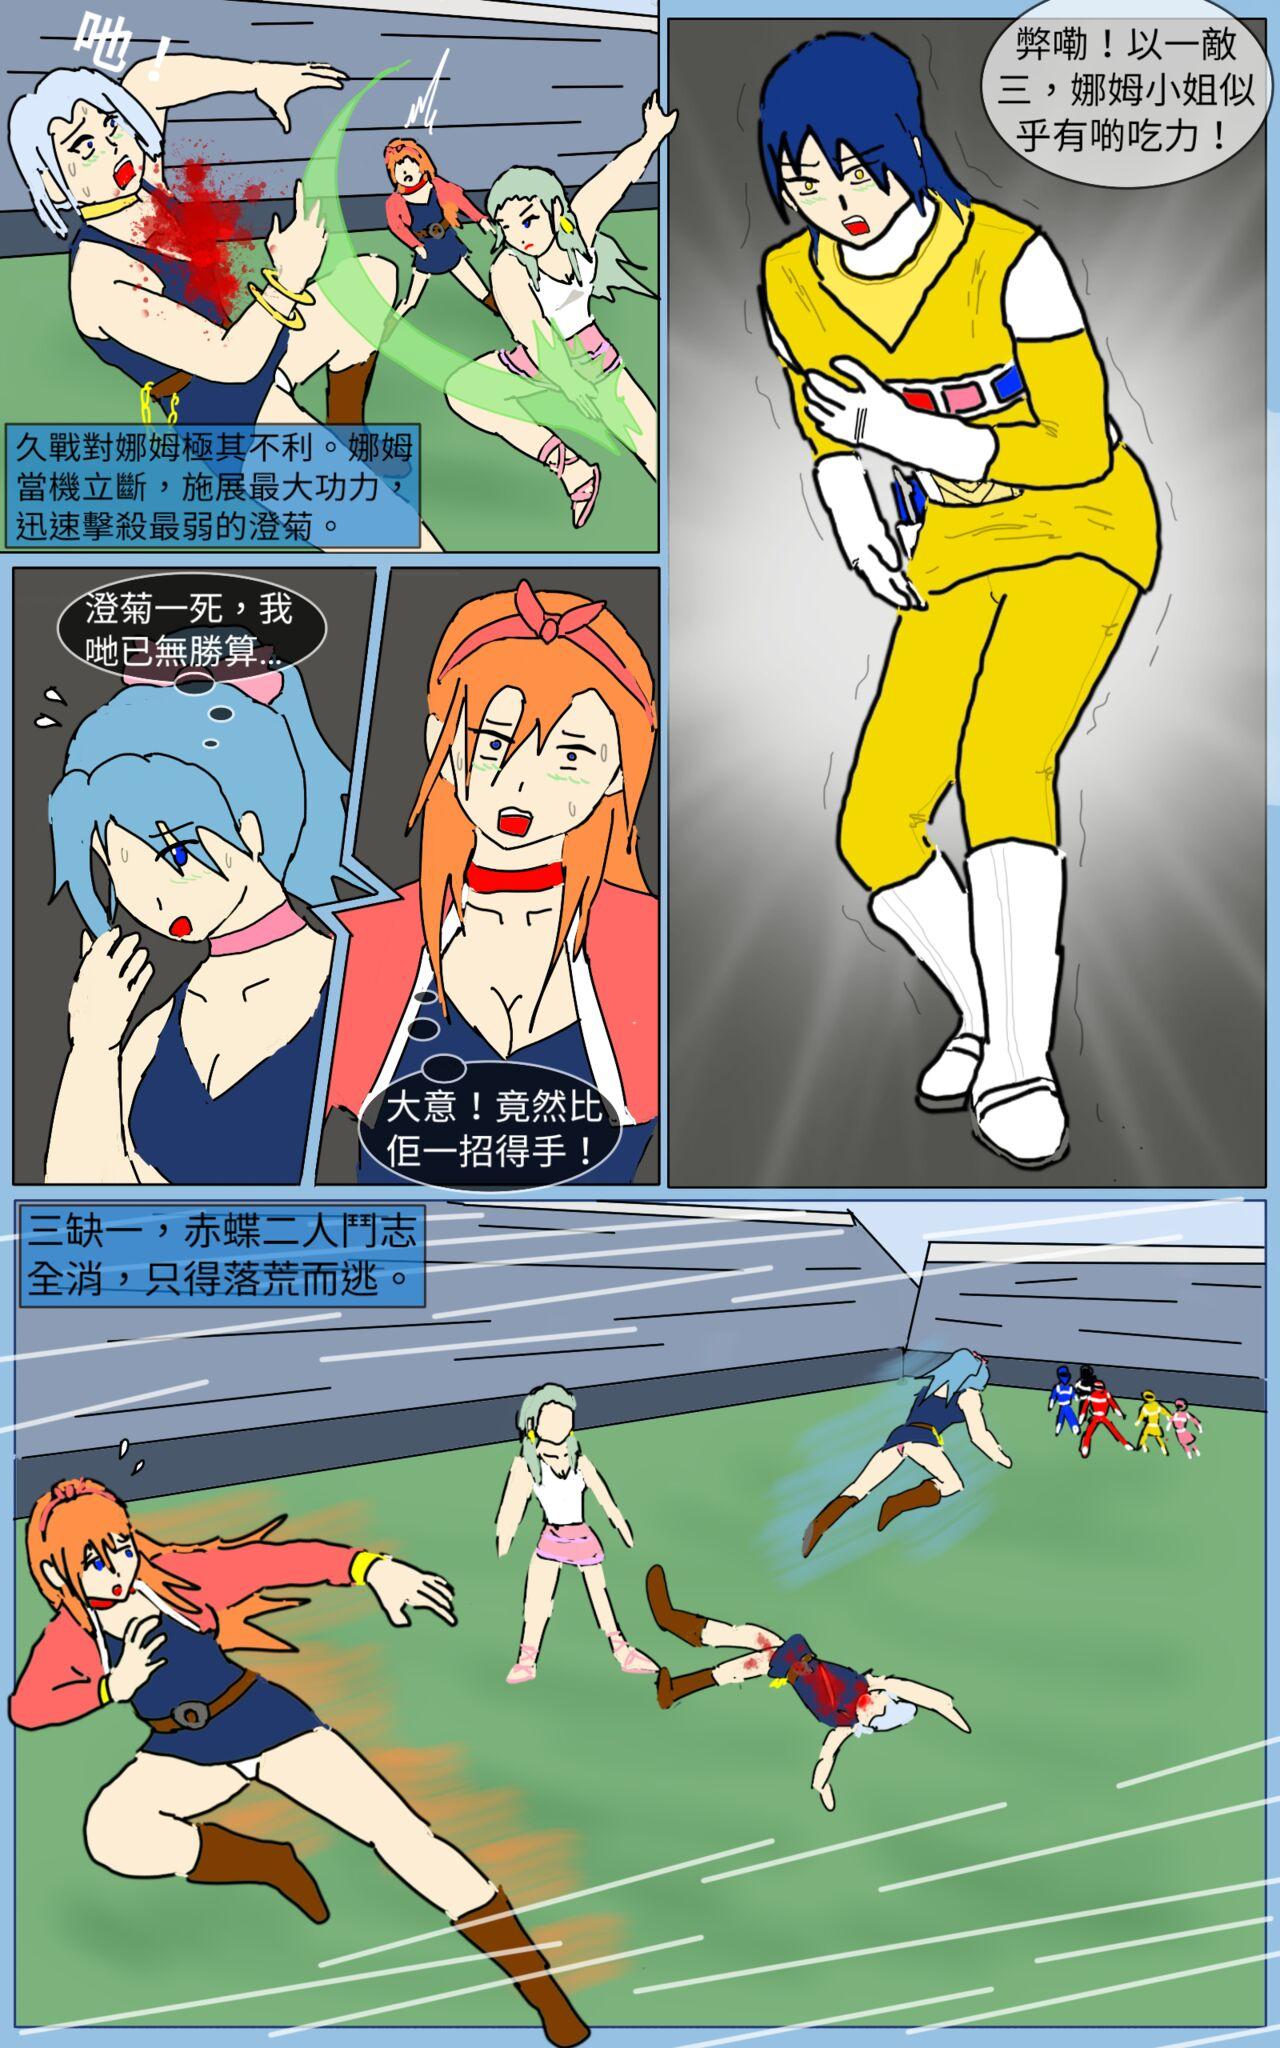 Girl Mission 13 - Super sentai Picked Up - Page 9